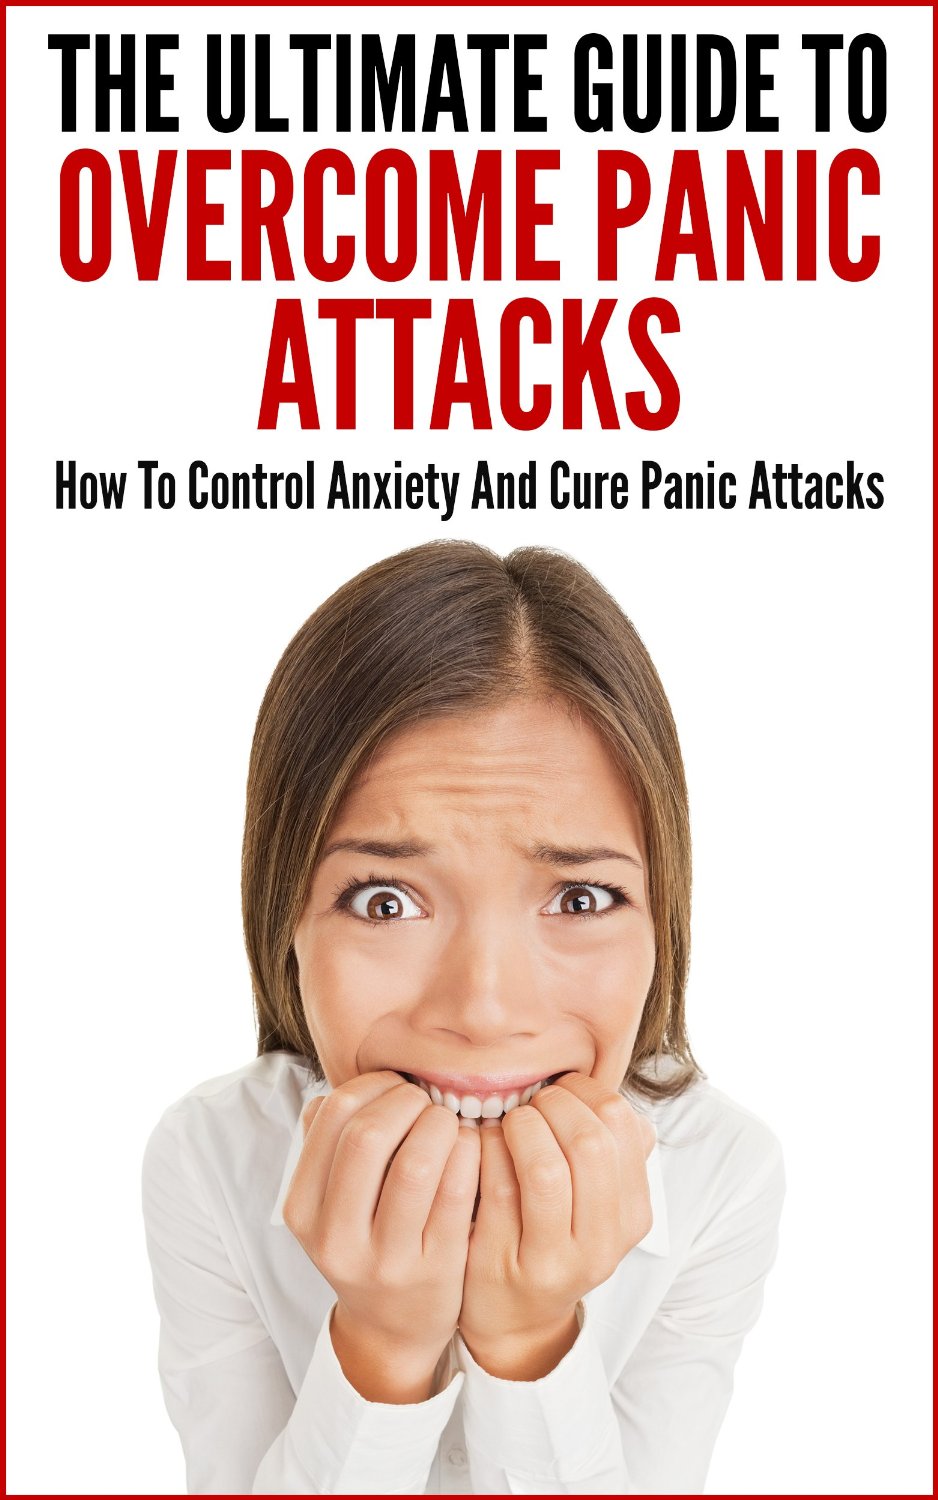 The Ultimate Guide To Overcome Panic Attacks: How To Control Anxiety And Cure Panic Attacks by Elizabeth Grace